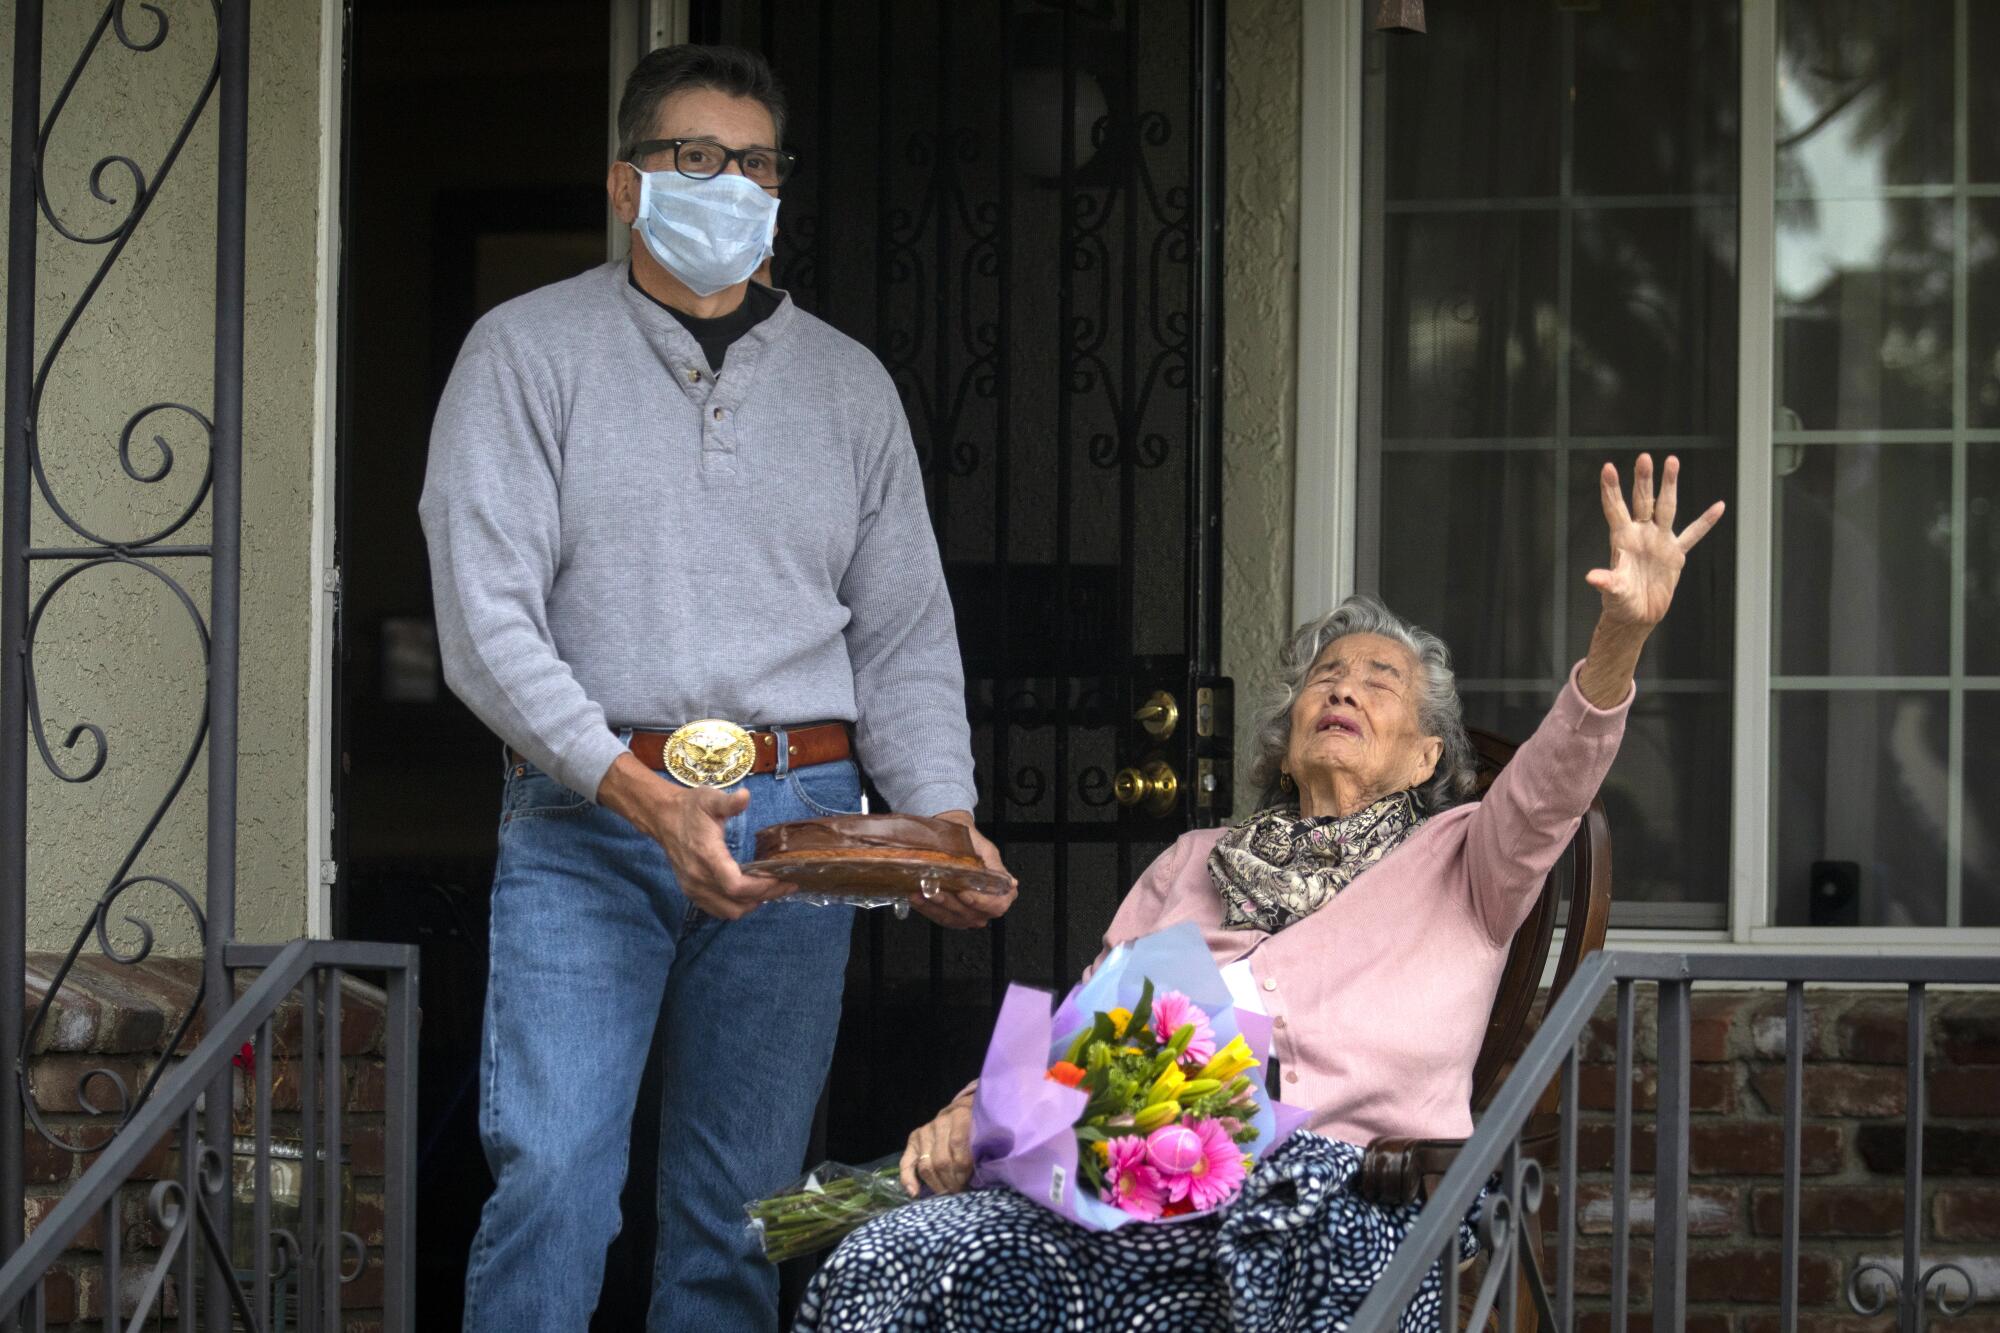 Socorro Mojjaro Duran celebrates her 91st birthday on her porch in Alhambra on Monday as her son, Guillermo Mojarro, holds her birthday cake and her family drives past in a caravan celebration.